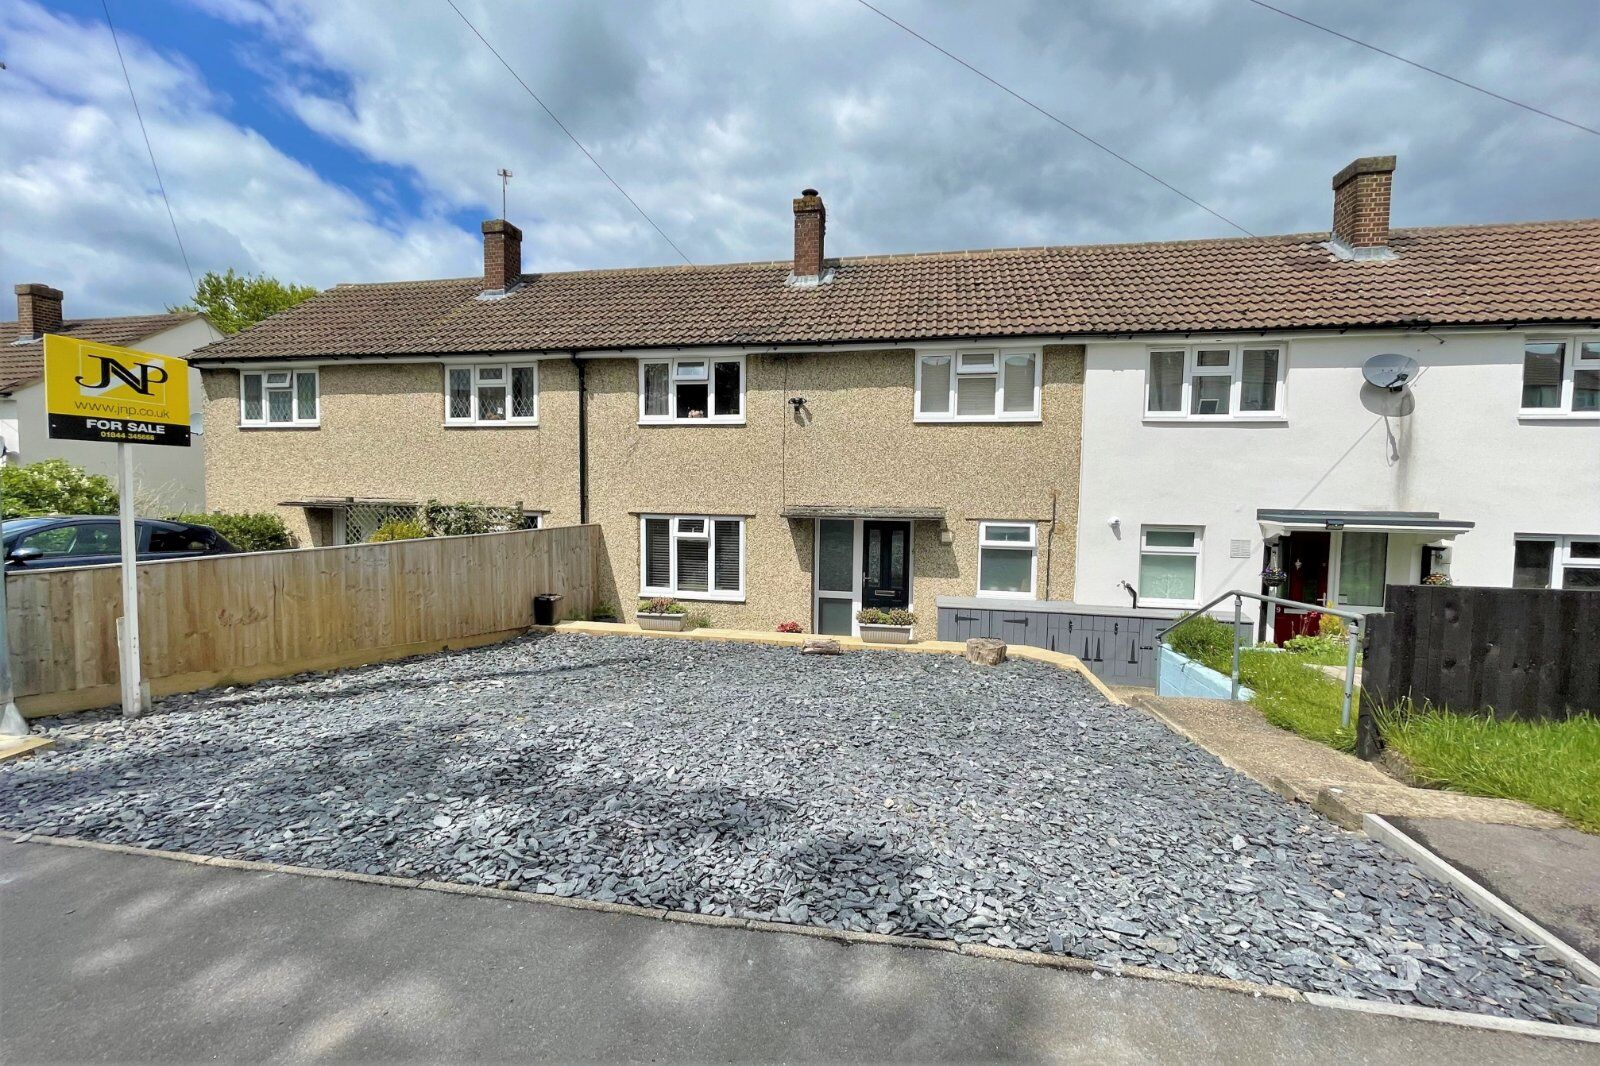 3 bedroom mid terraced house for sale Southfield Road, Princes Risborough, HP27, main image